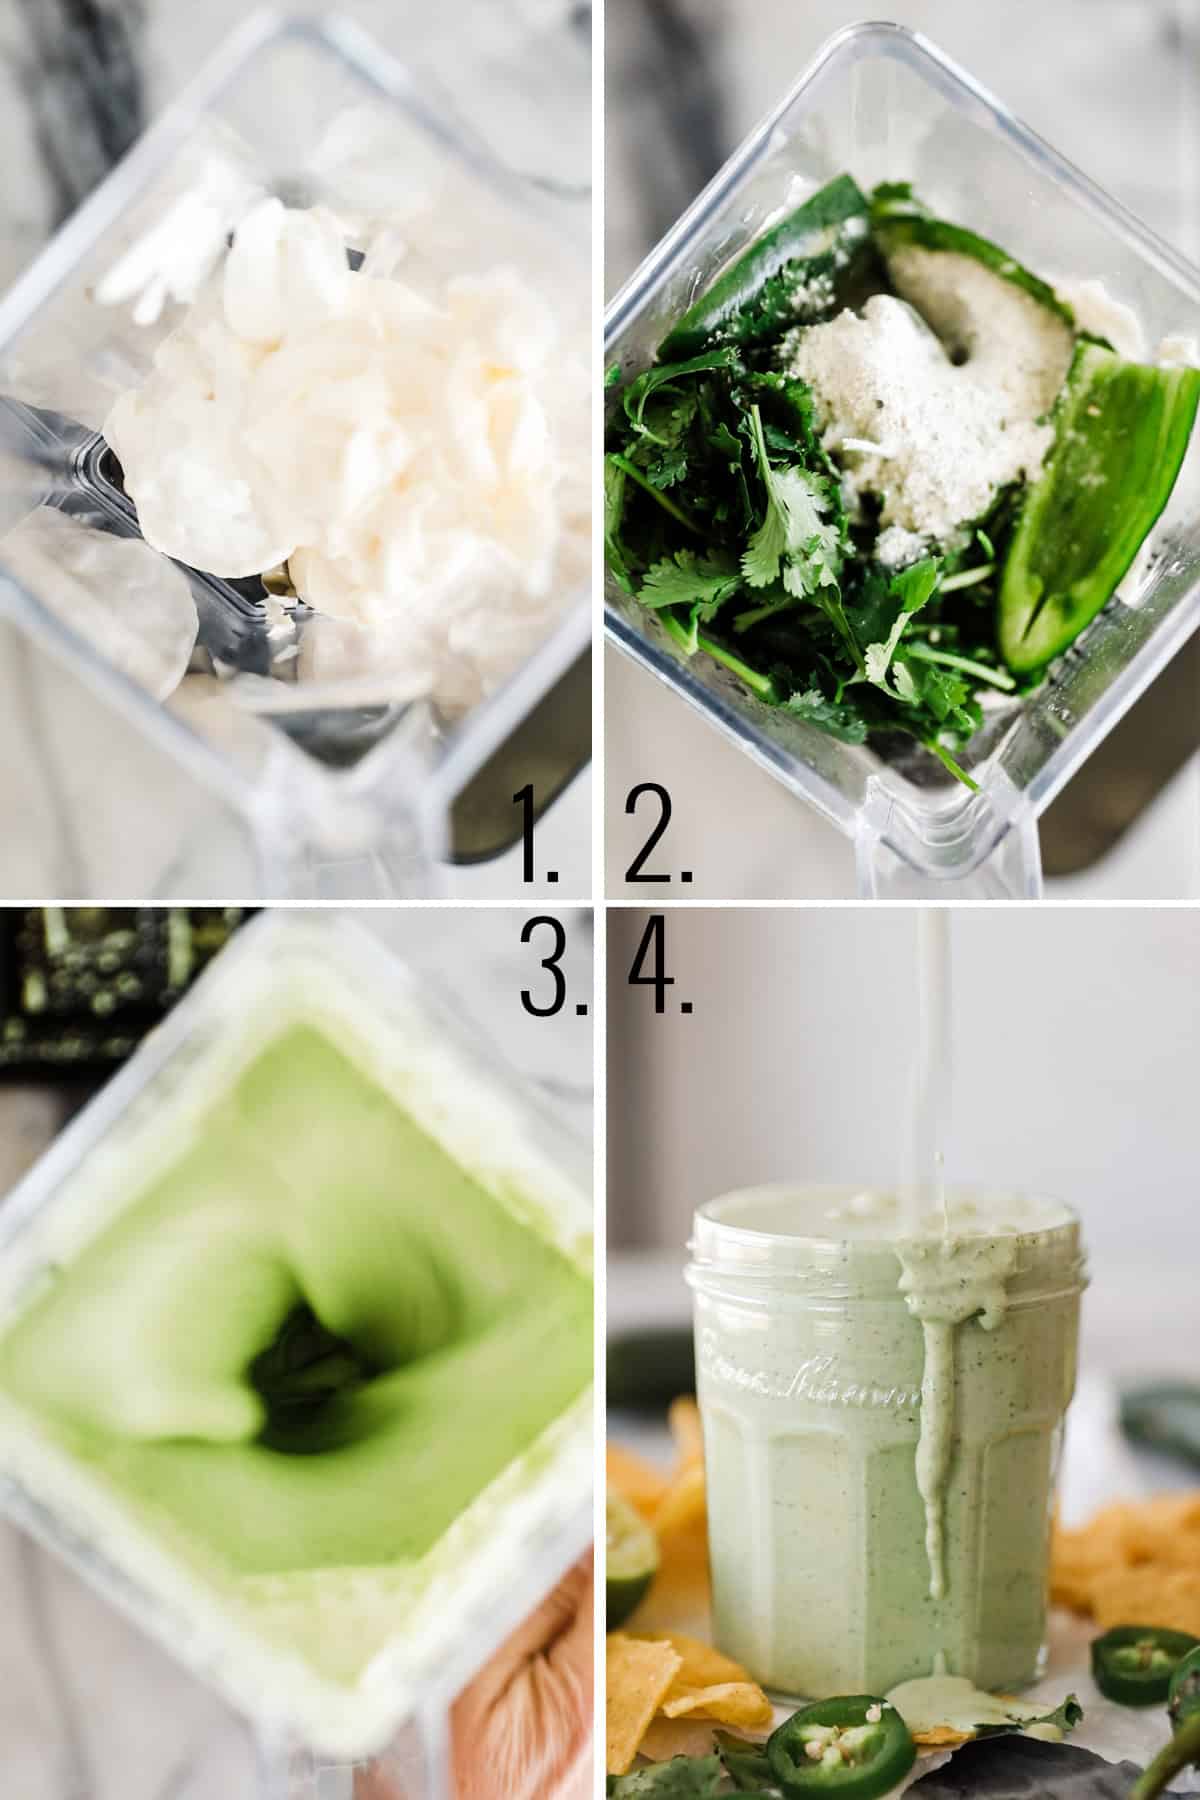 Four step by step photos showing the ingredients added to a blender and blended.